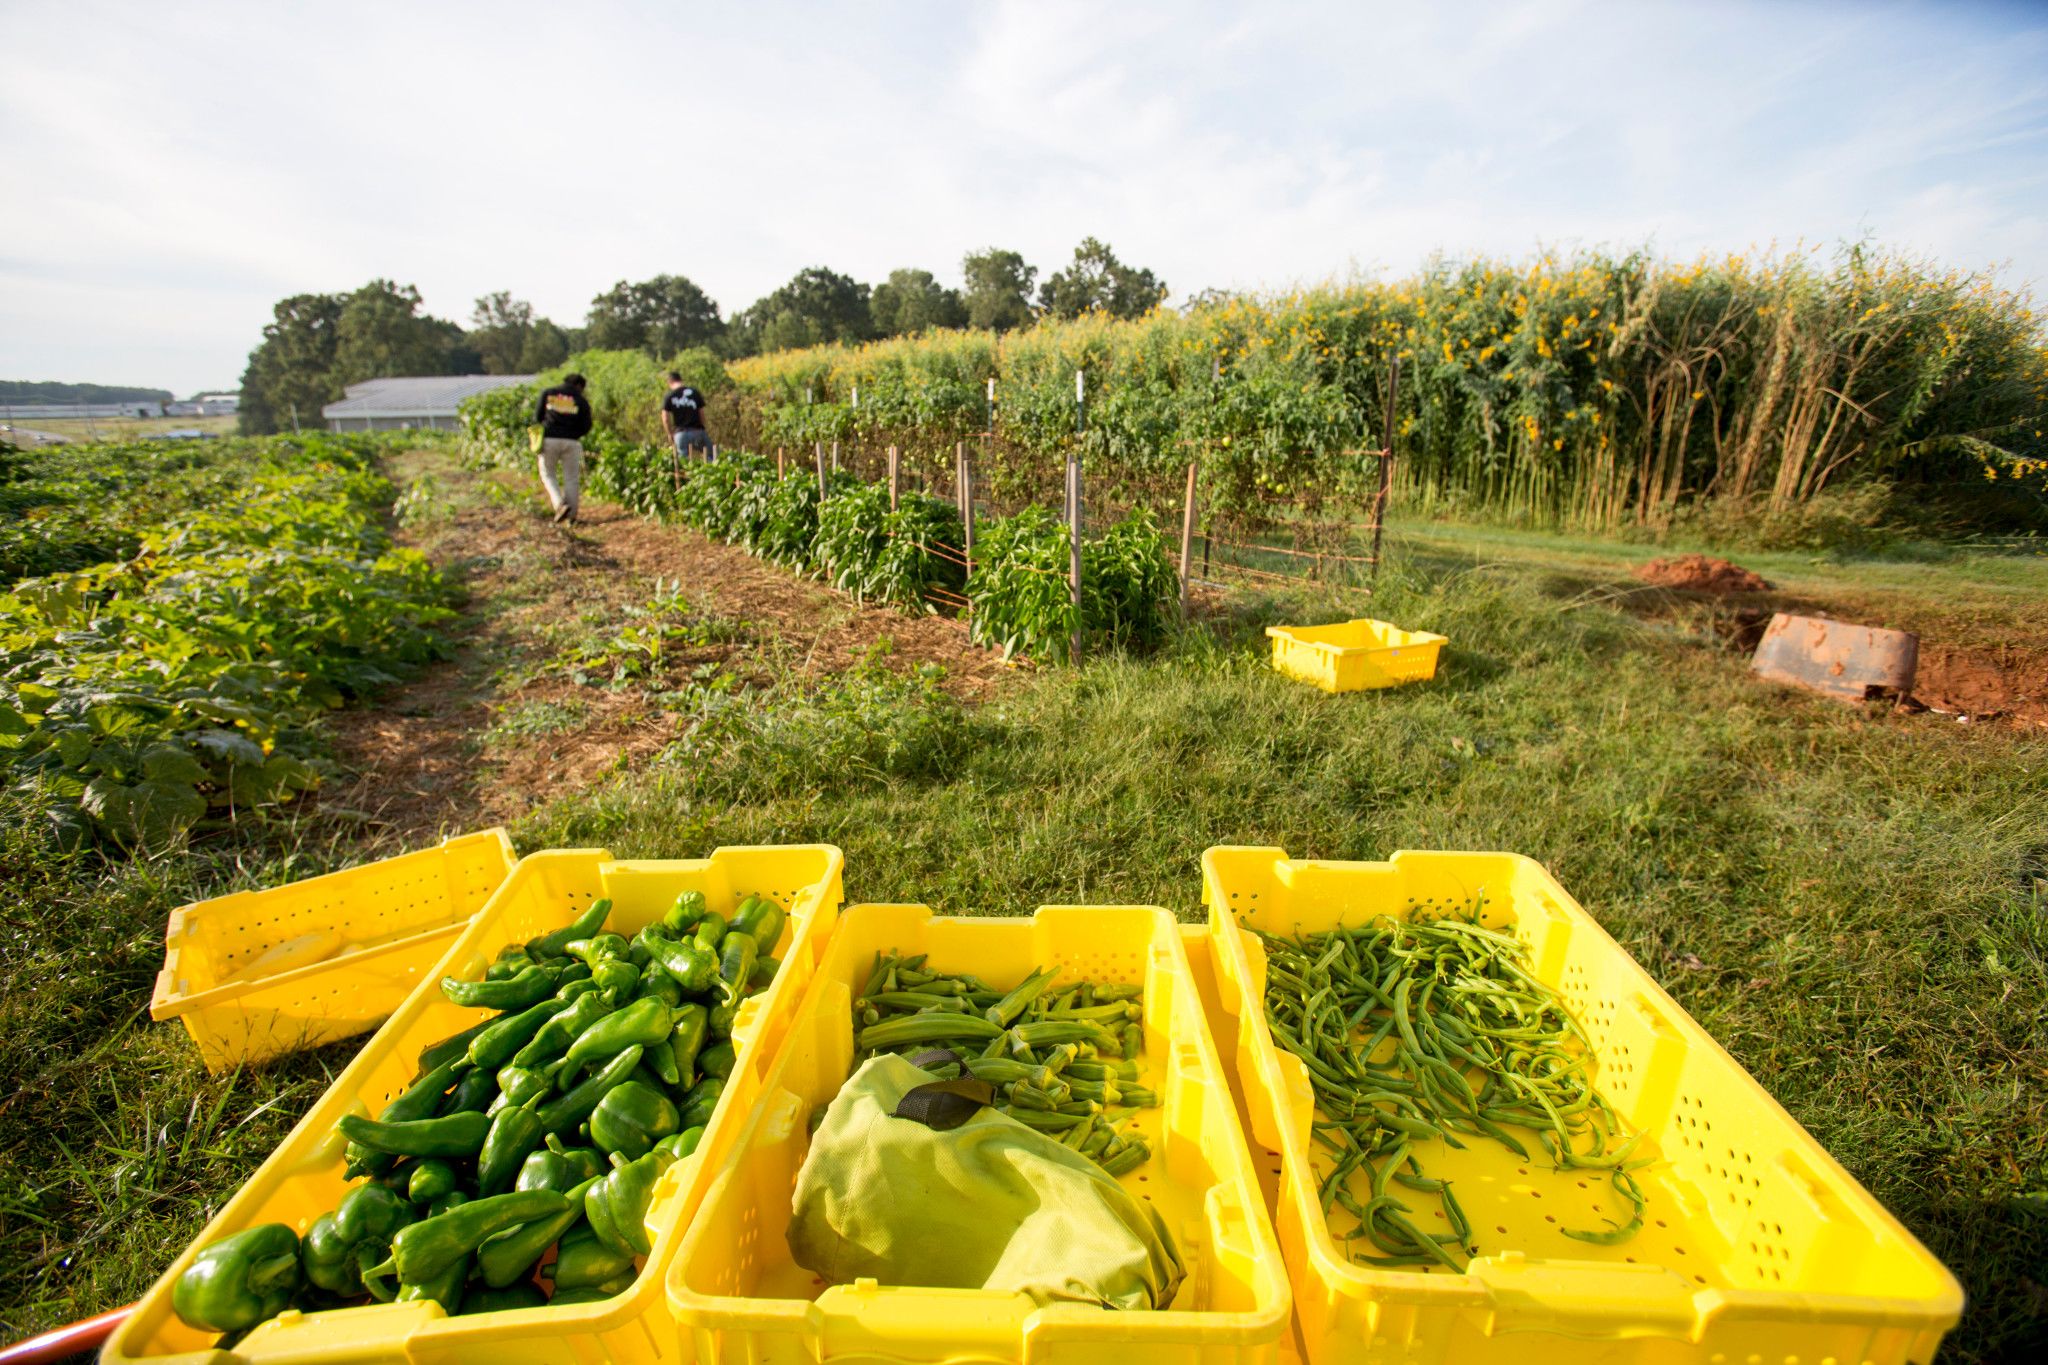 Campus Kitchen at UGA students harvest crops in UGArden to feed the community.